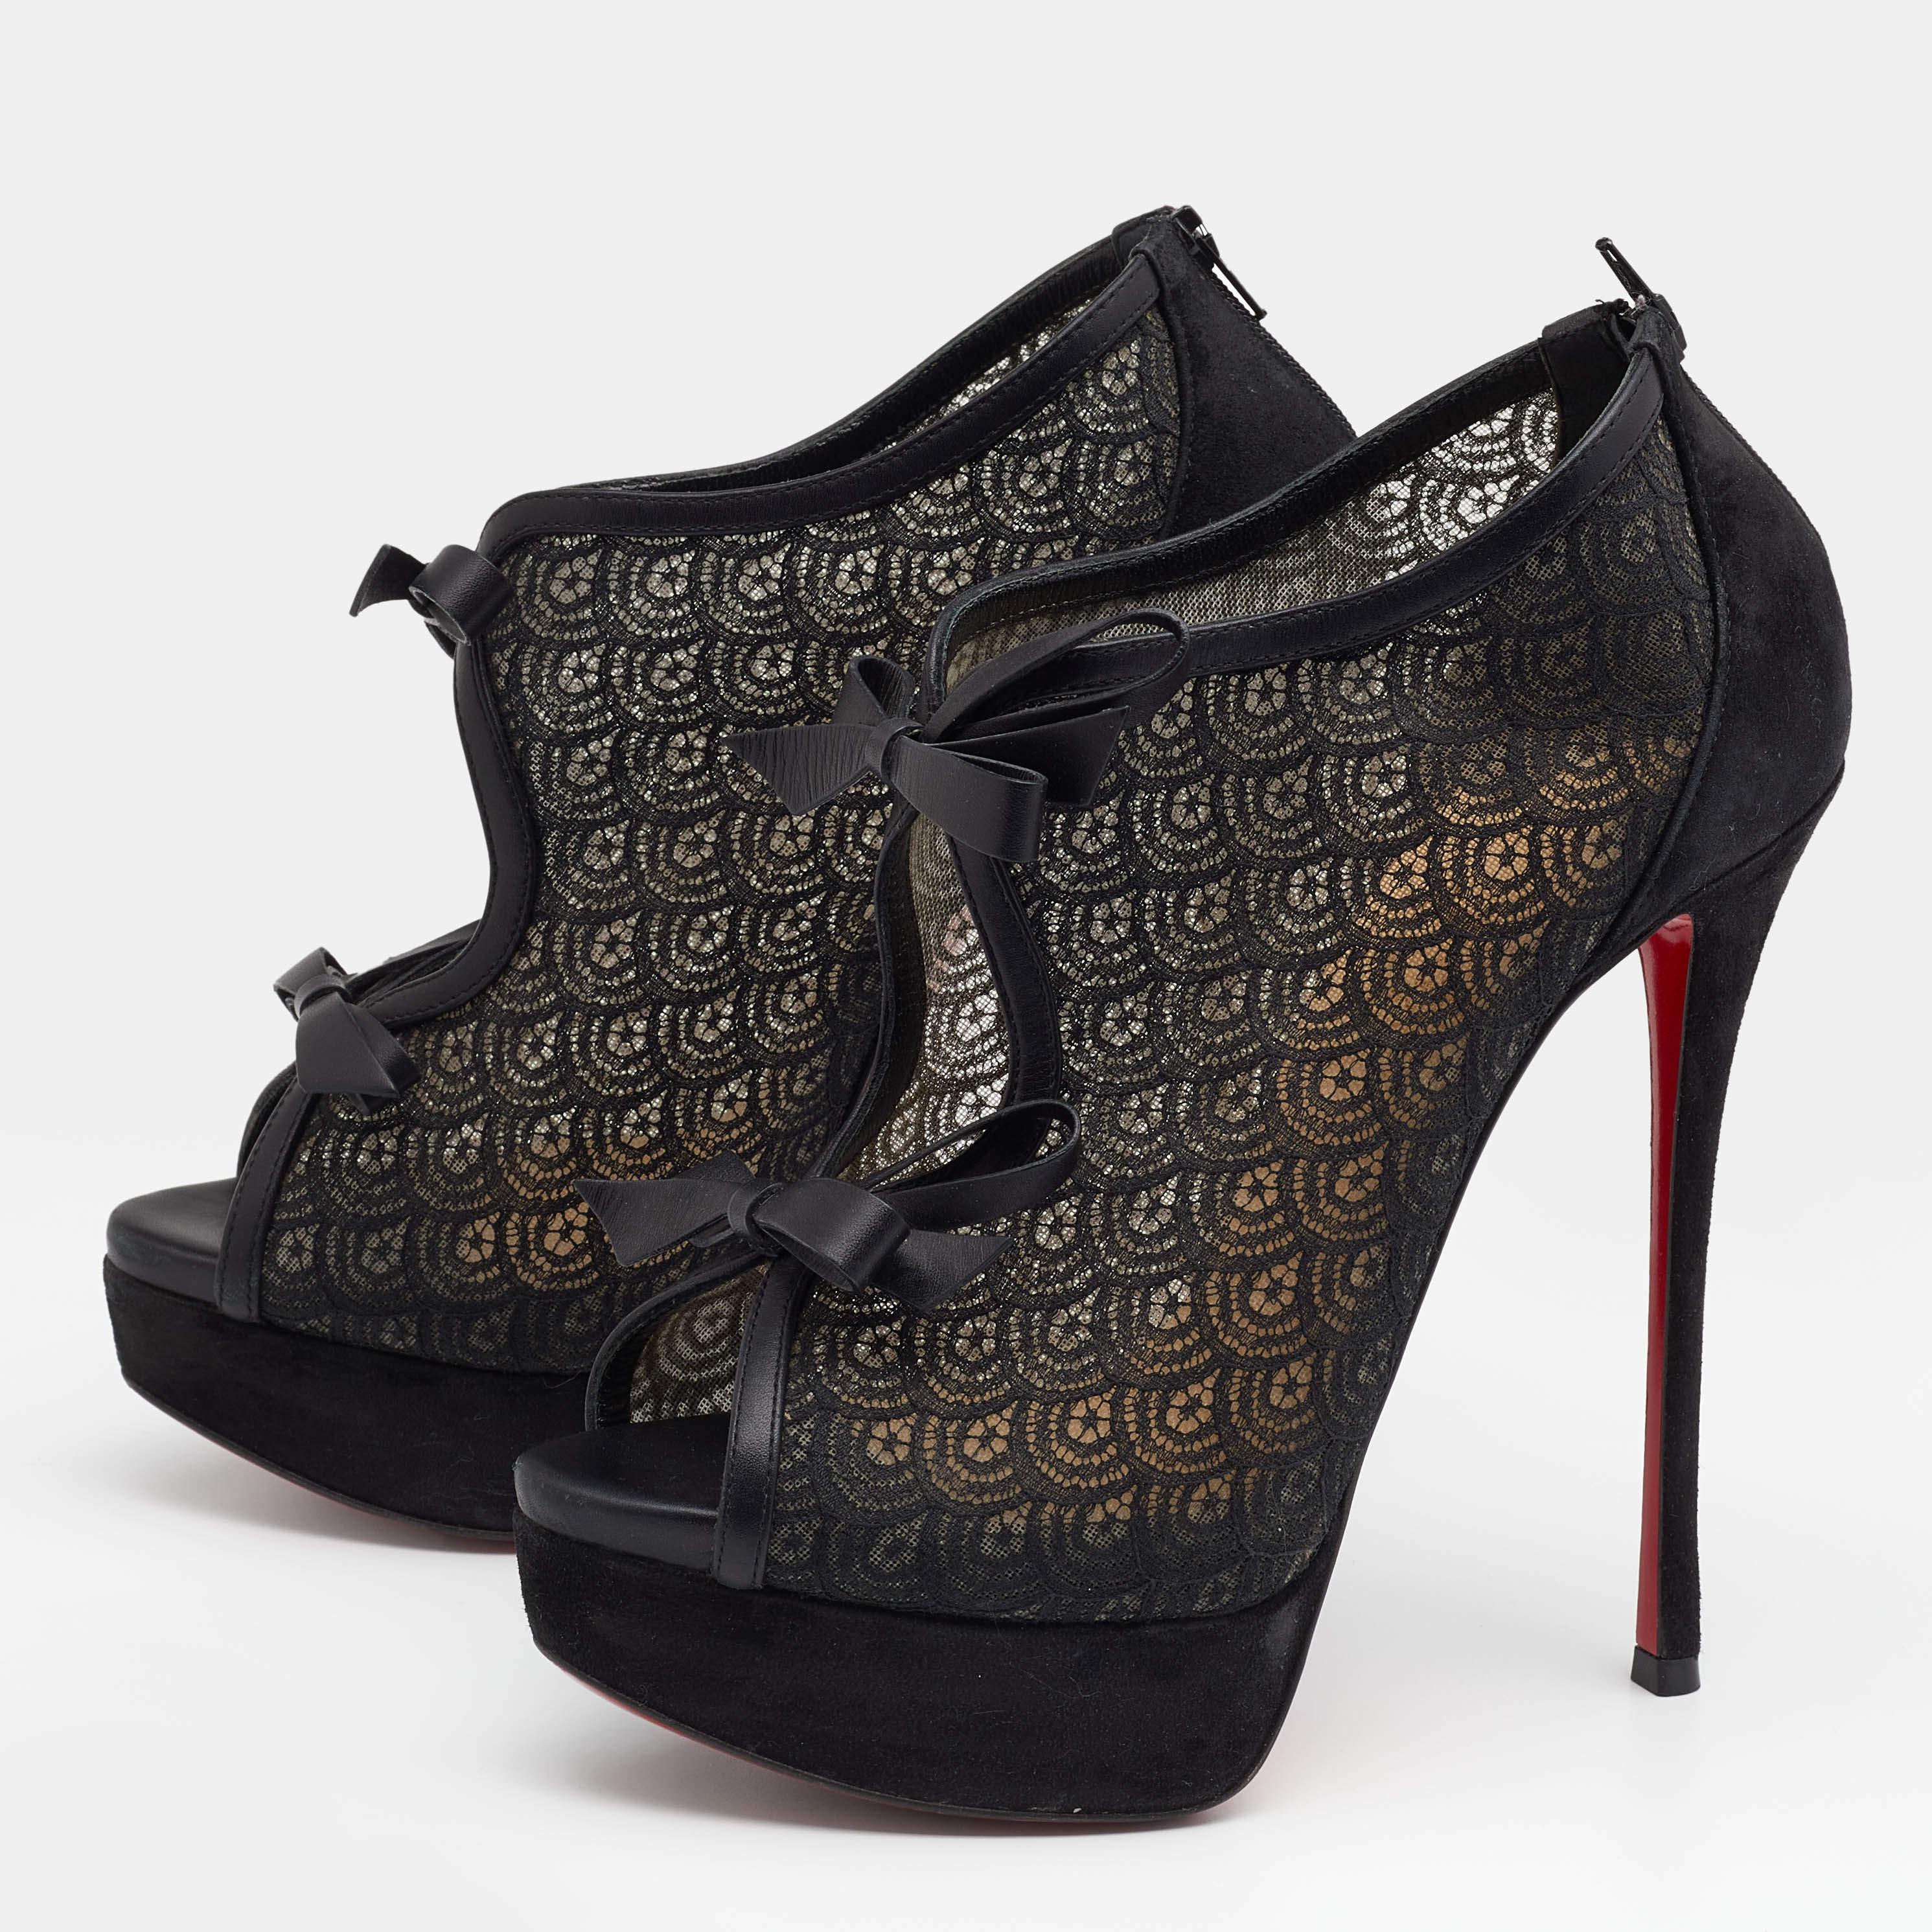 A pair of suede and mesh booties are just what you need to make a lasting impression. This awestruck beauty by Christian Louboutin features 14cm heels, platforms, and bow detailing at the front. Designed into an open-toe silhouette, these shoes come